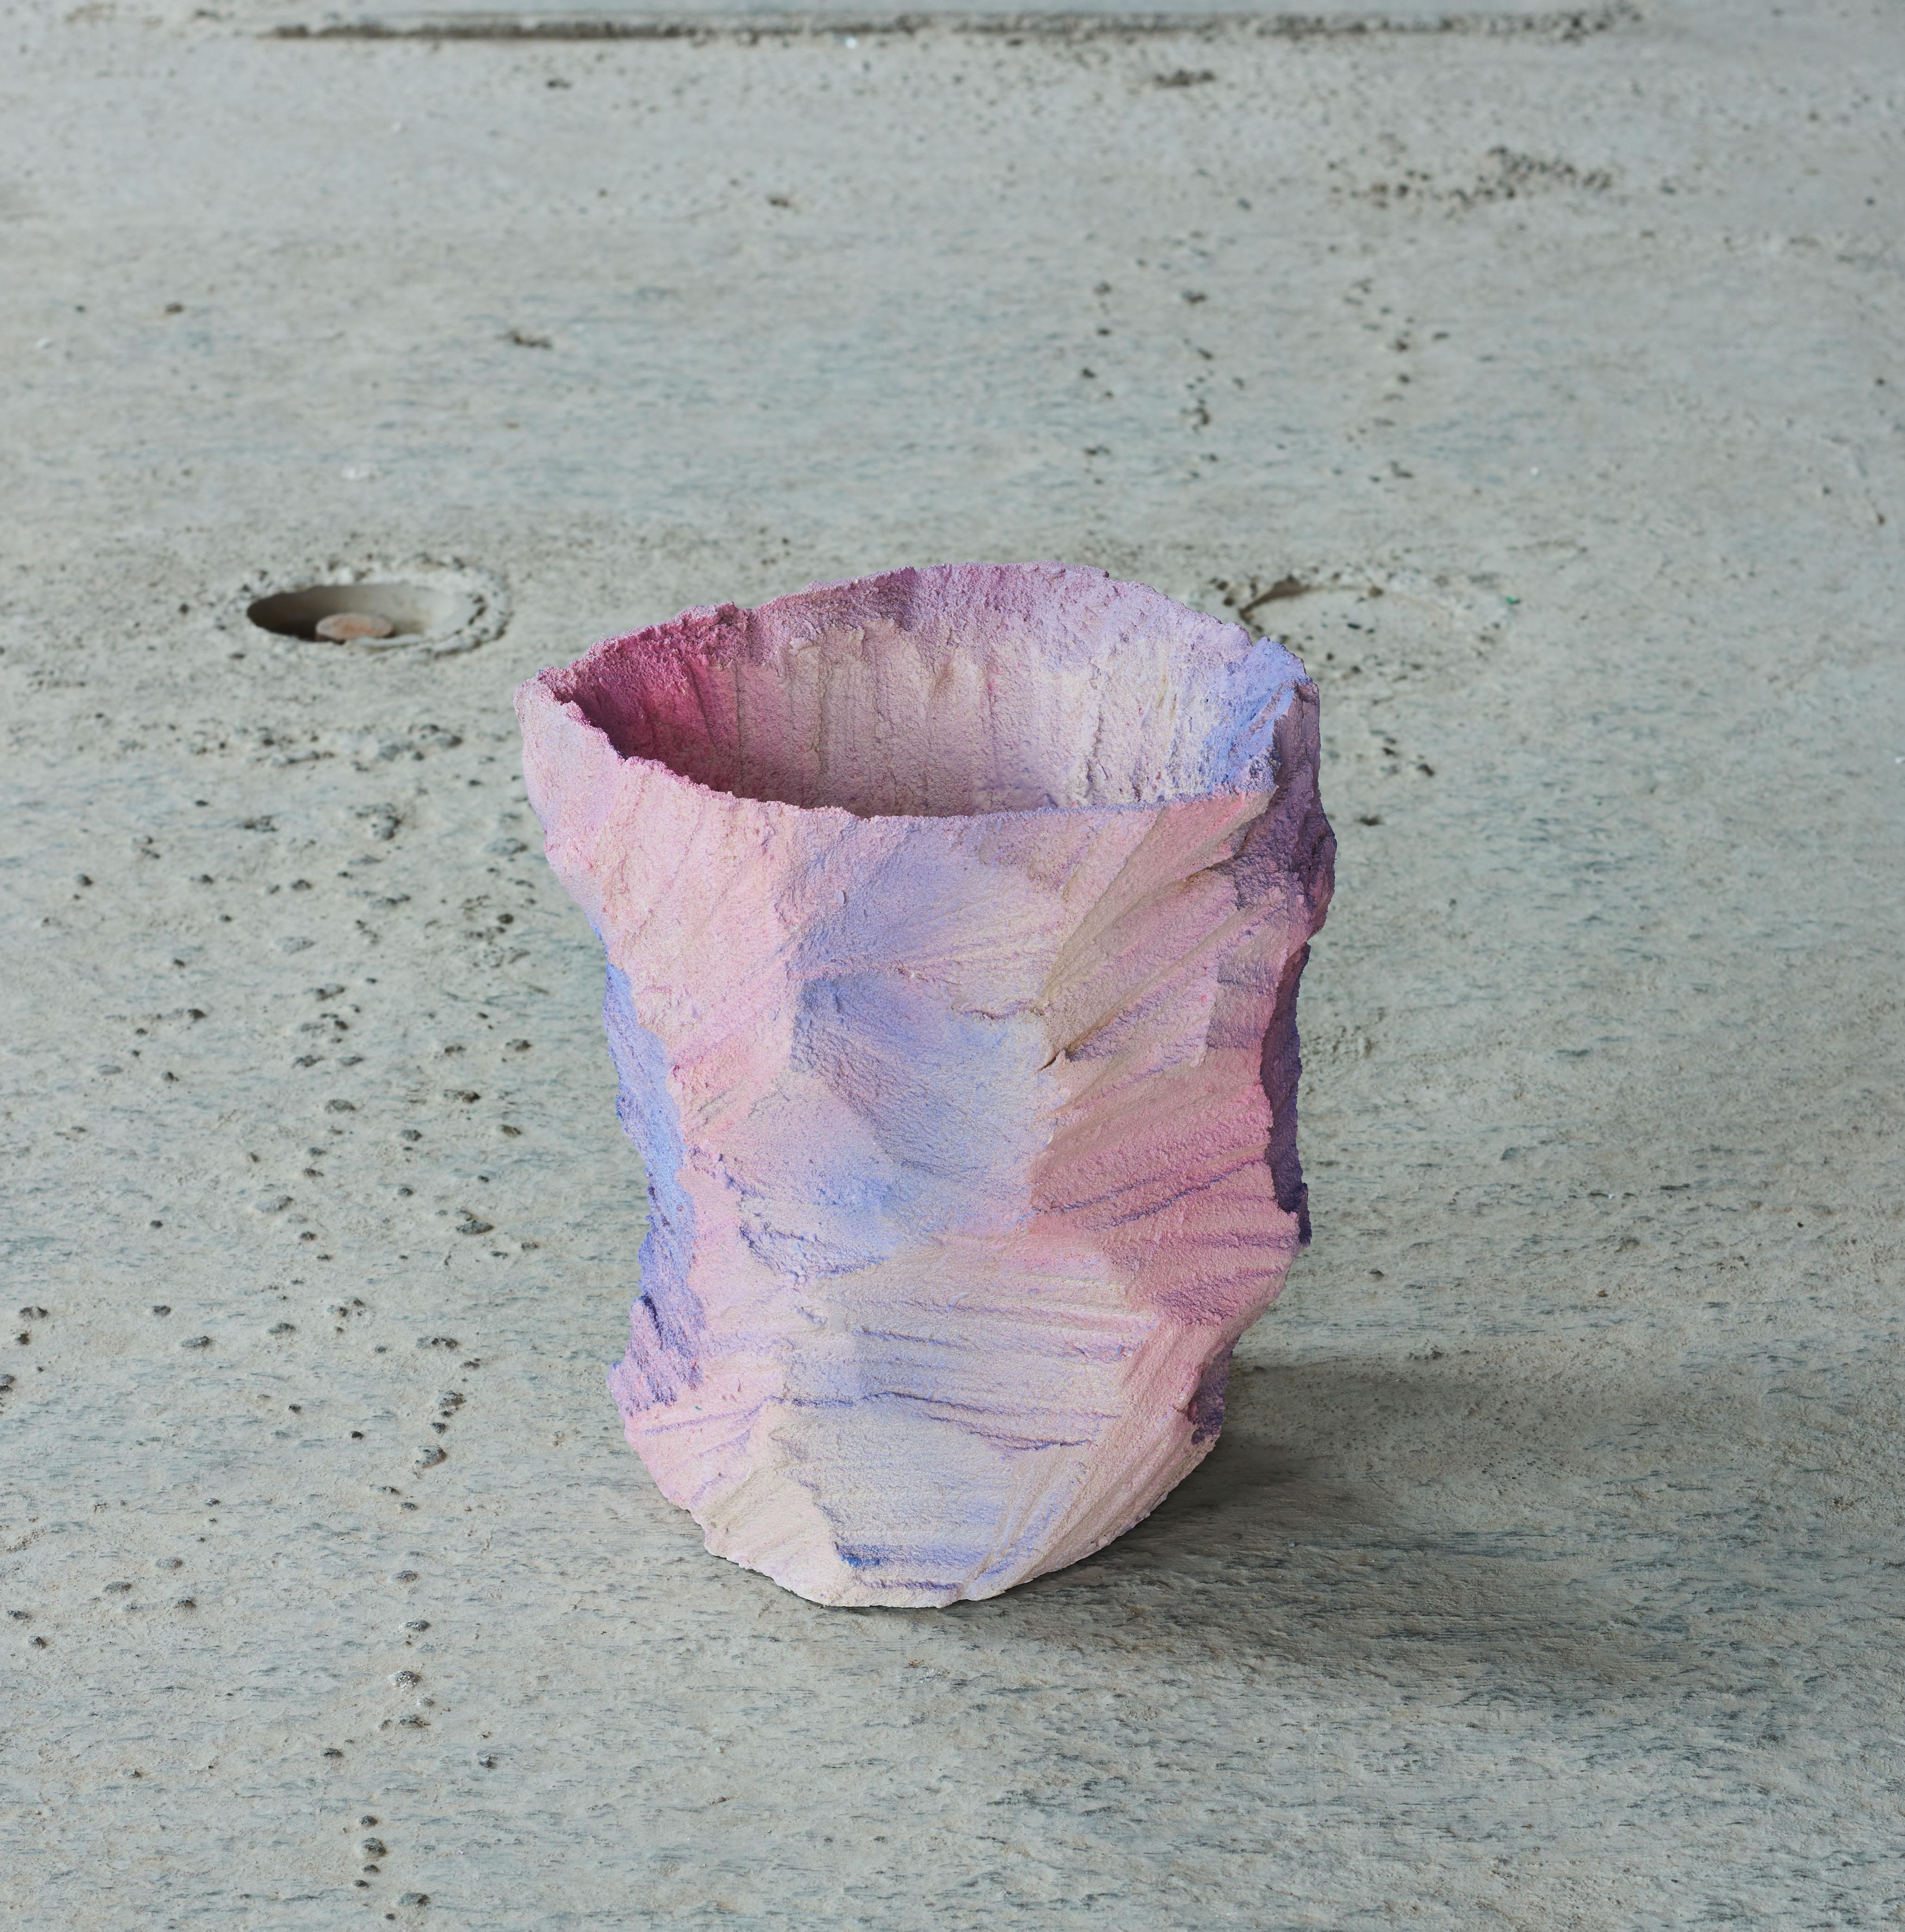 One of a kind - Contemporary Design Christal - Vase by Andredottir & Bobek
Artificial Nature is a collaboration between the artist and design duo Josephine Andredottir and Emilie Bobek

They have in this project imitated landscape with artificial